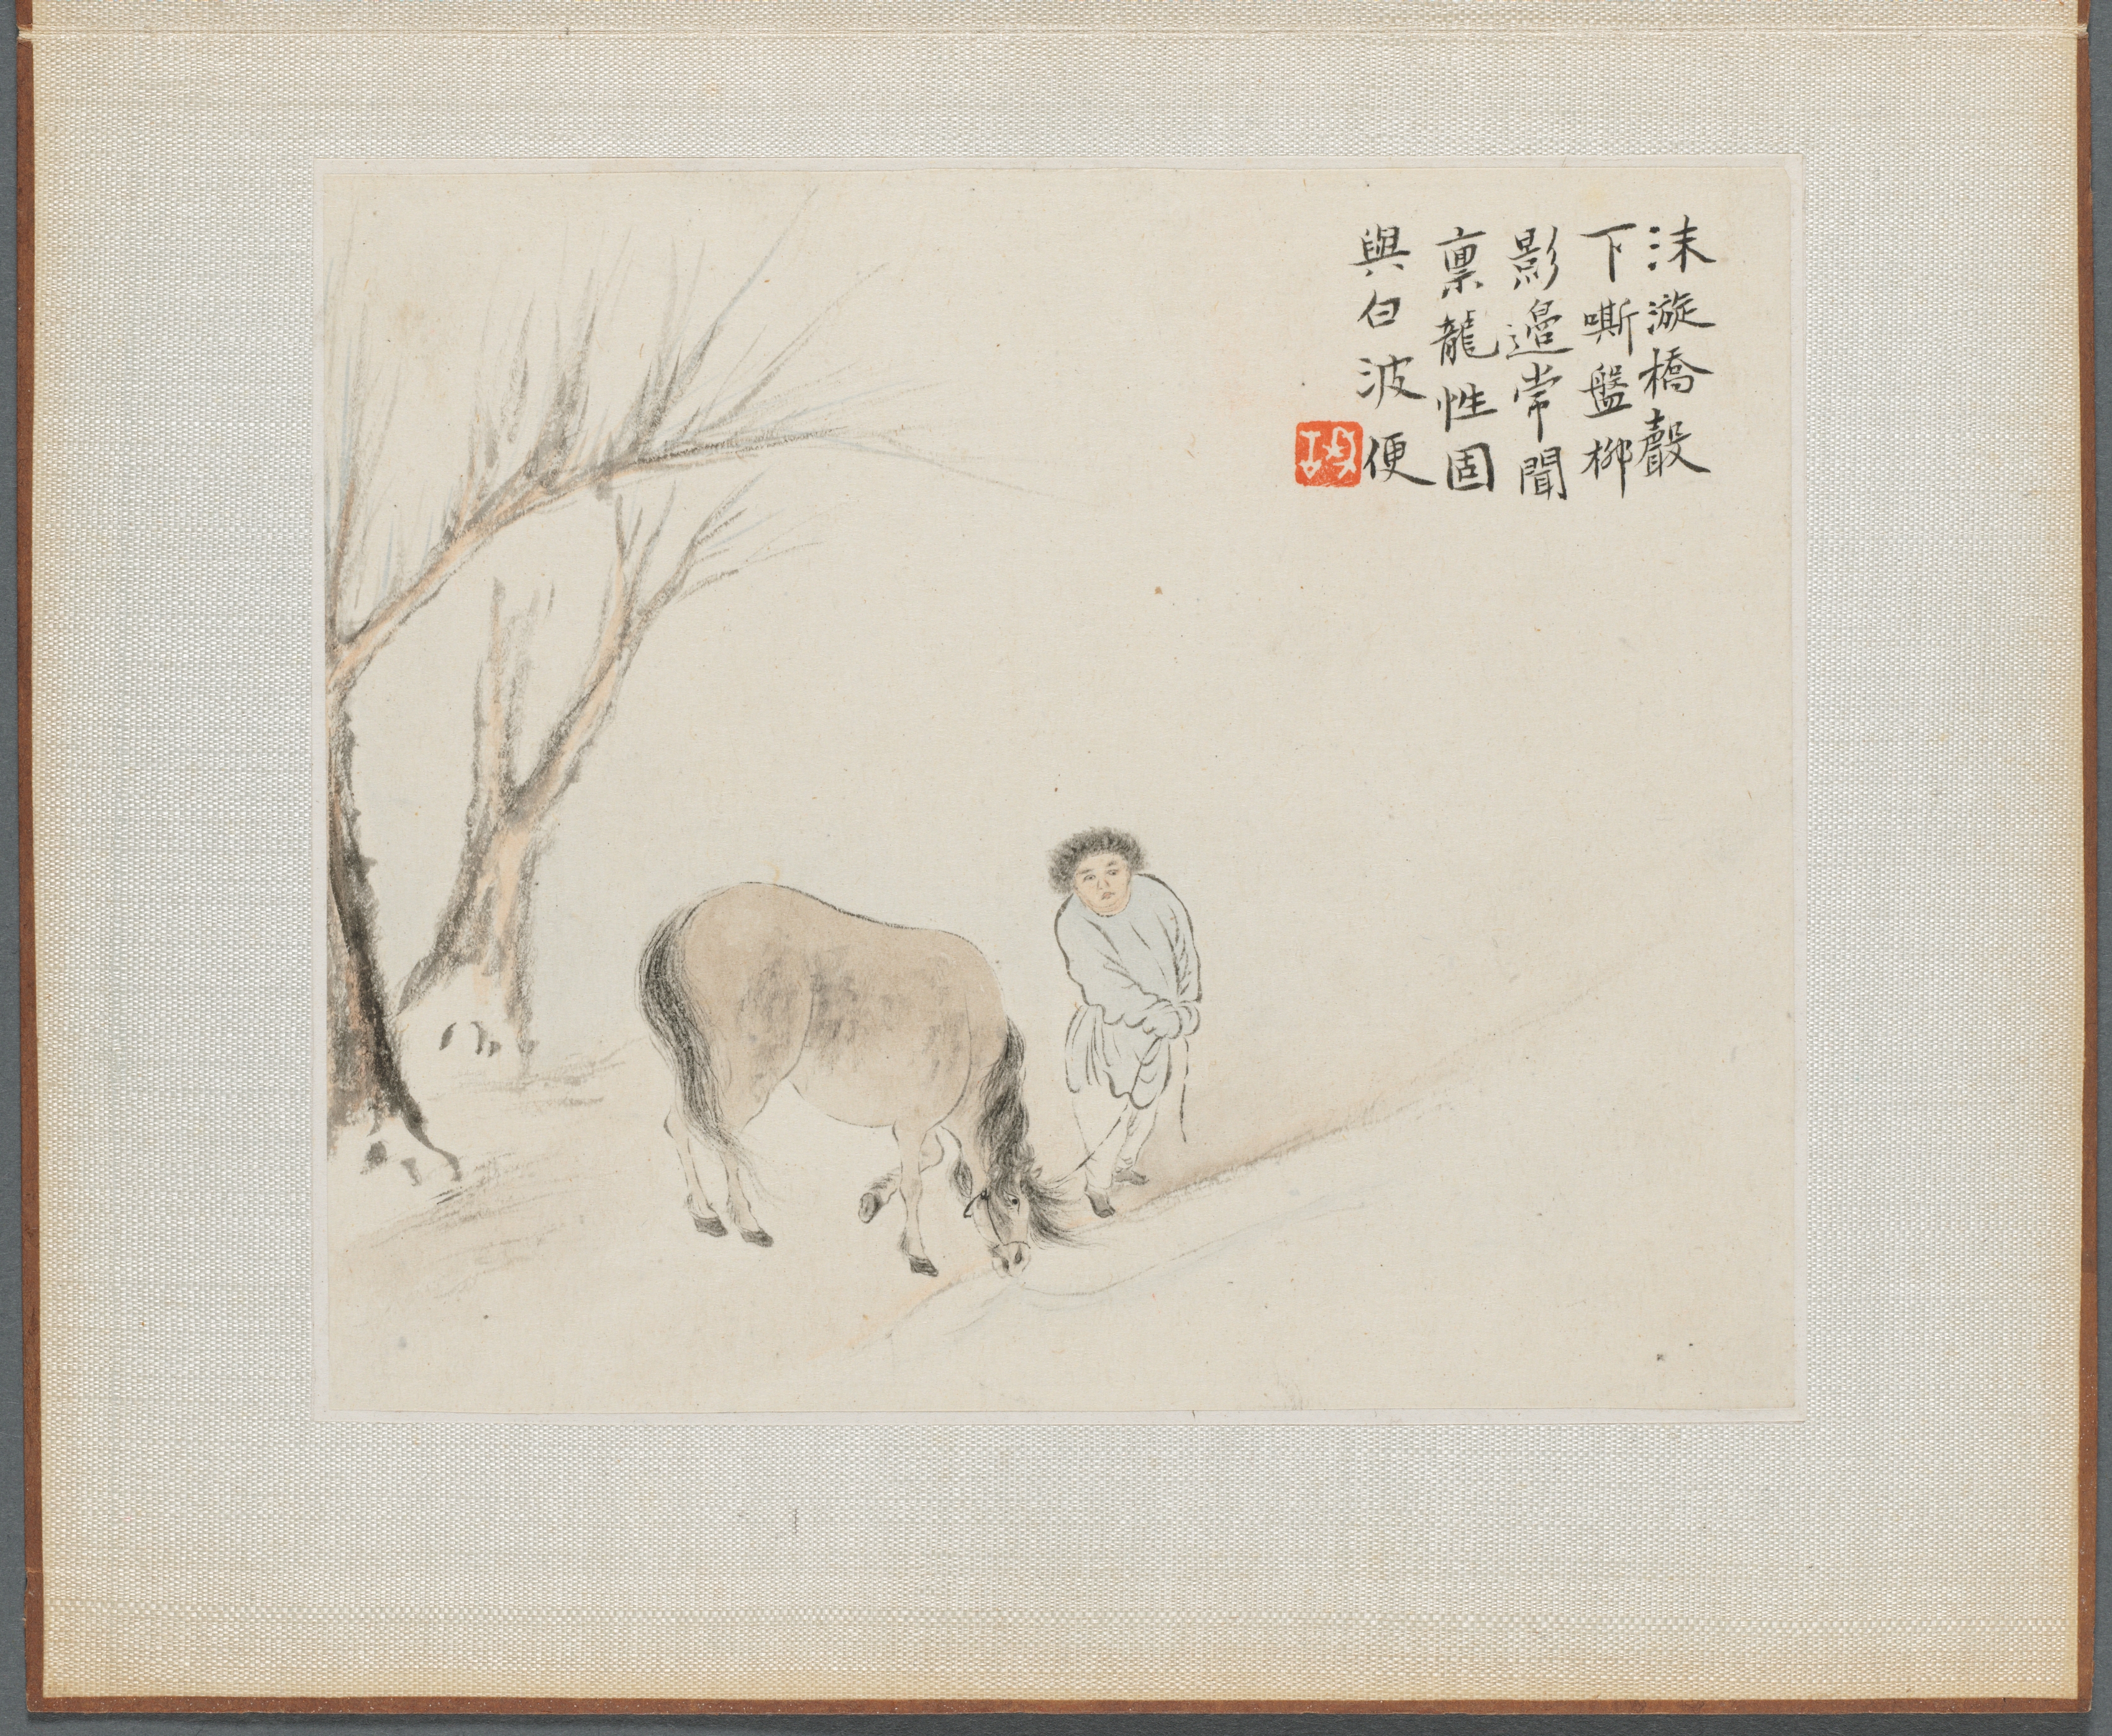 Album of Landscape Paintings Illustrating Old Poems: Boy Holding a Horse